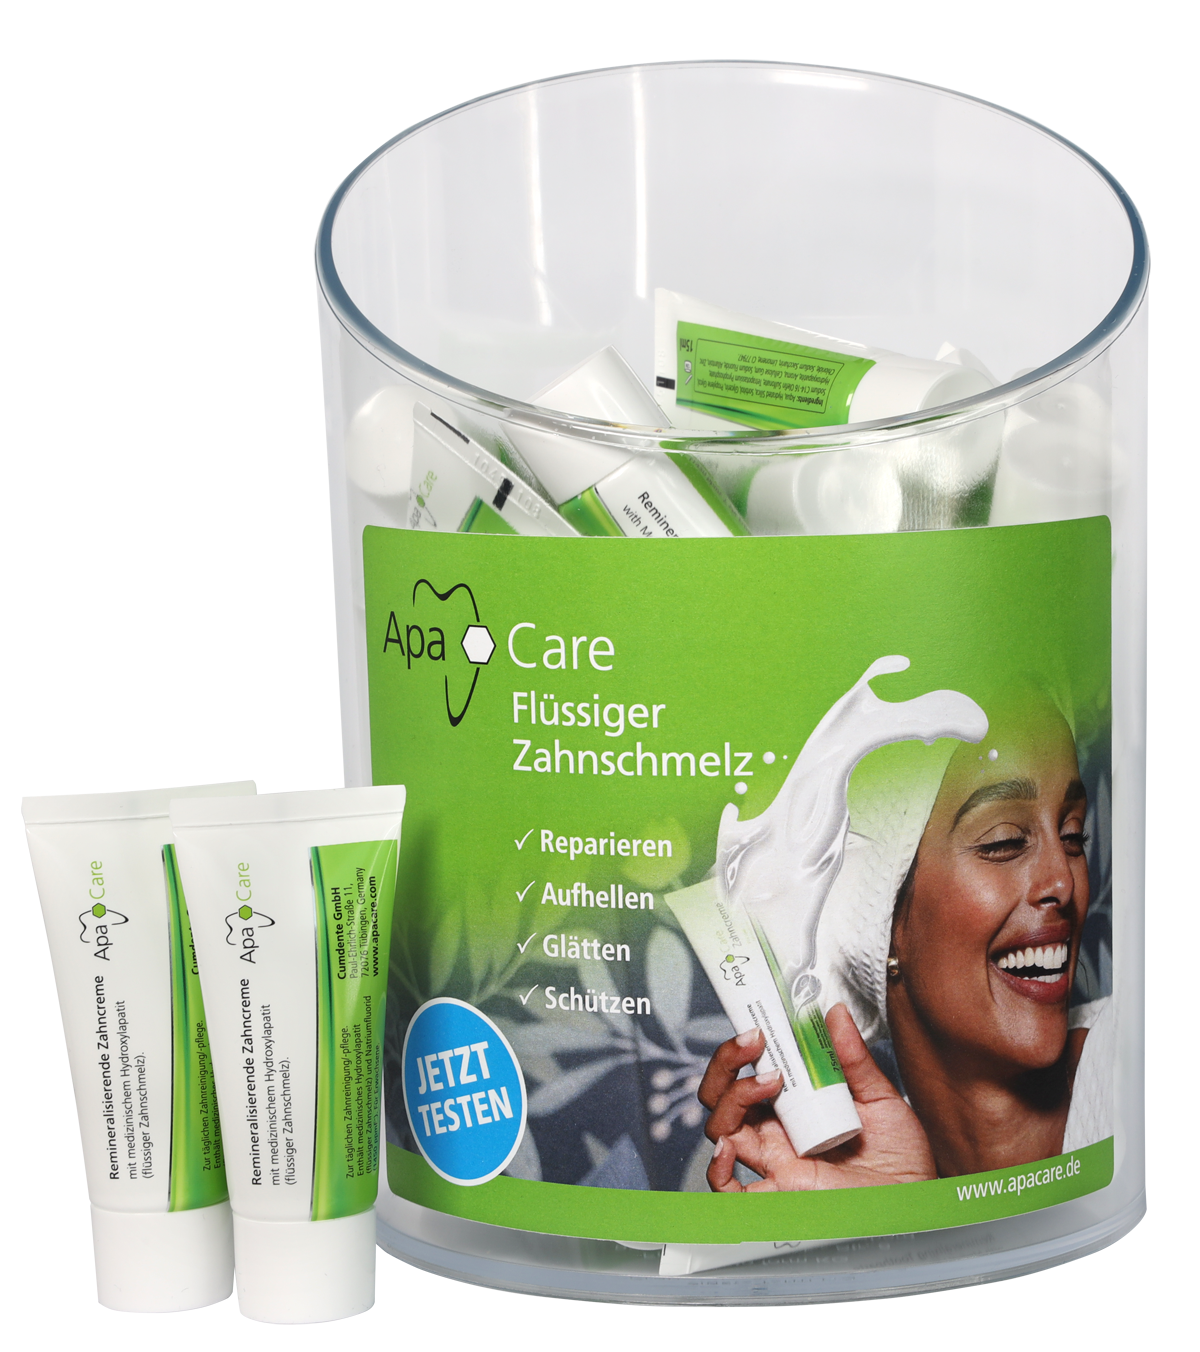 ApaCare remineralizing toothpaste samples 15 ml 40 tubes in an attractive acrylic counter box.